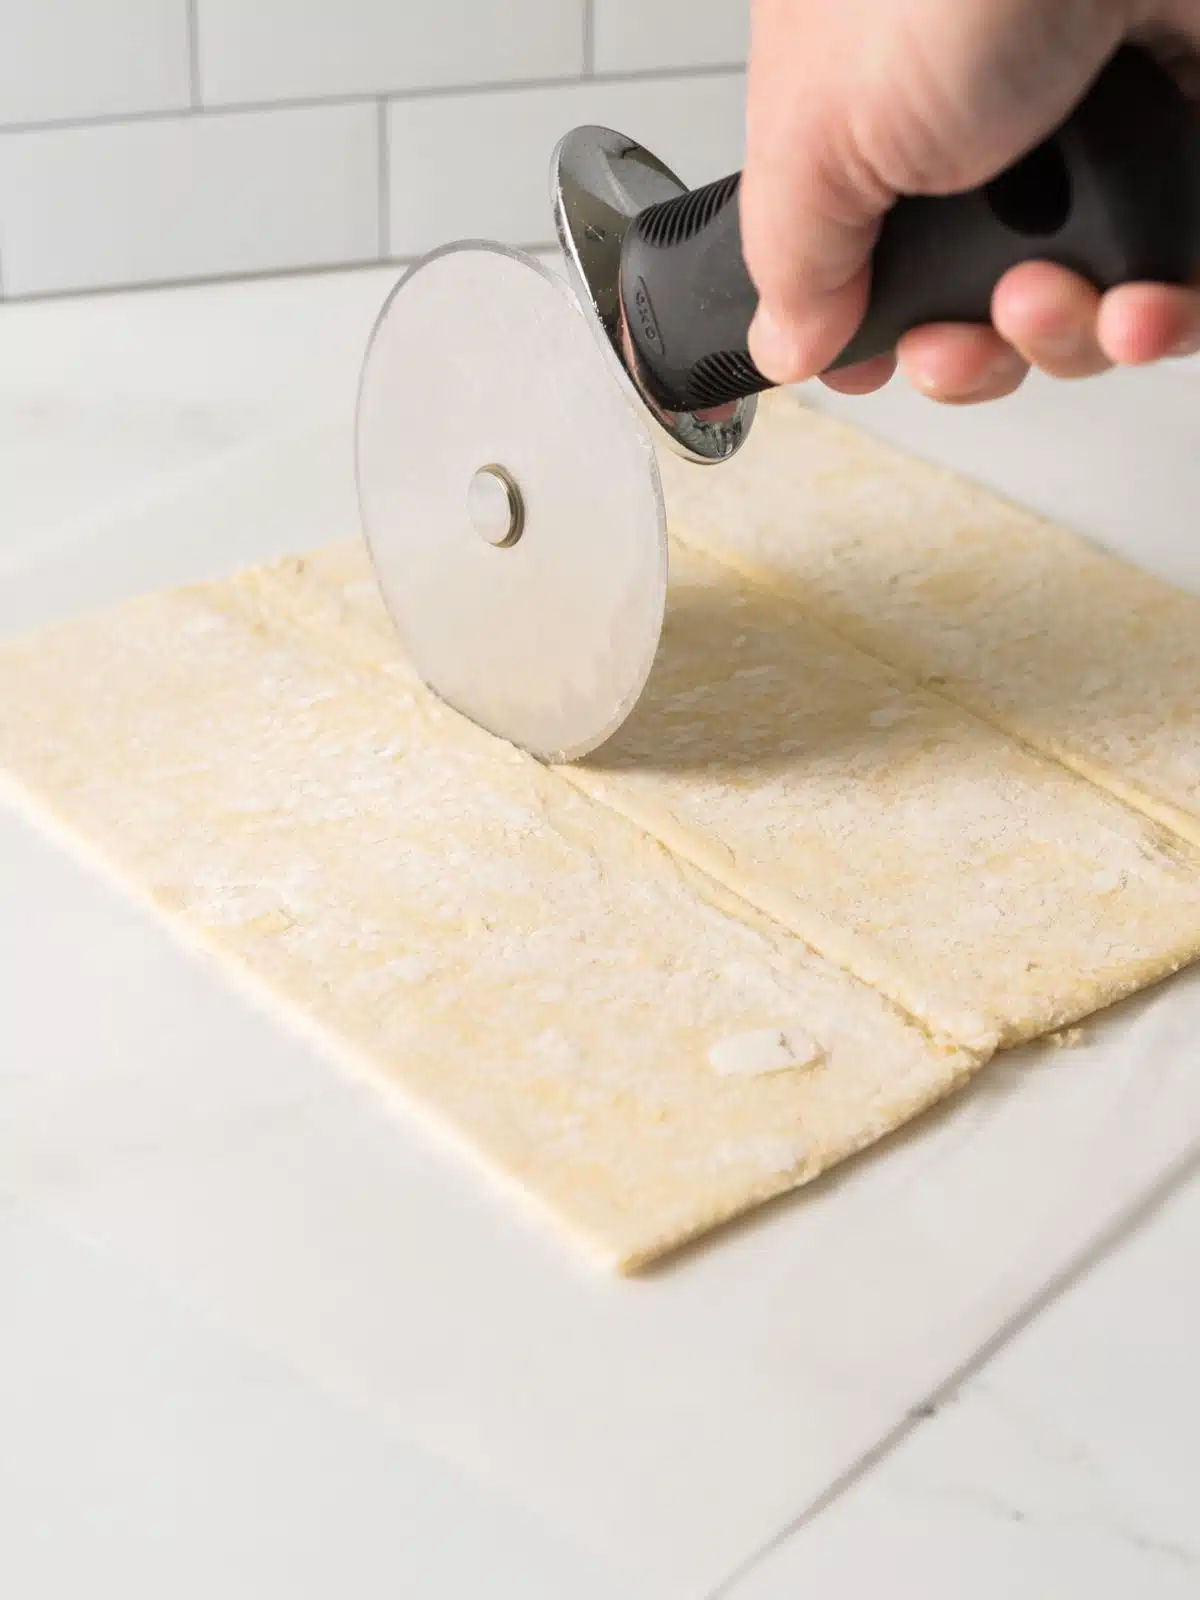 puff pastry being cut into thirds with a pizza cutter